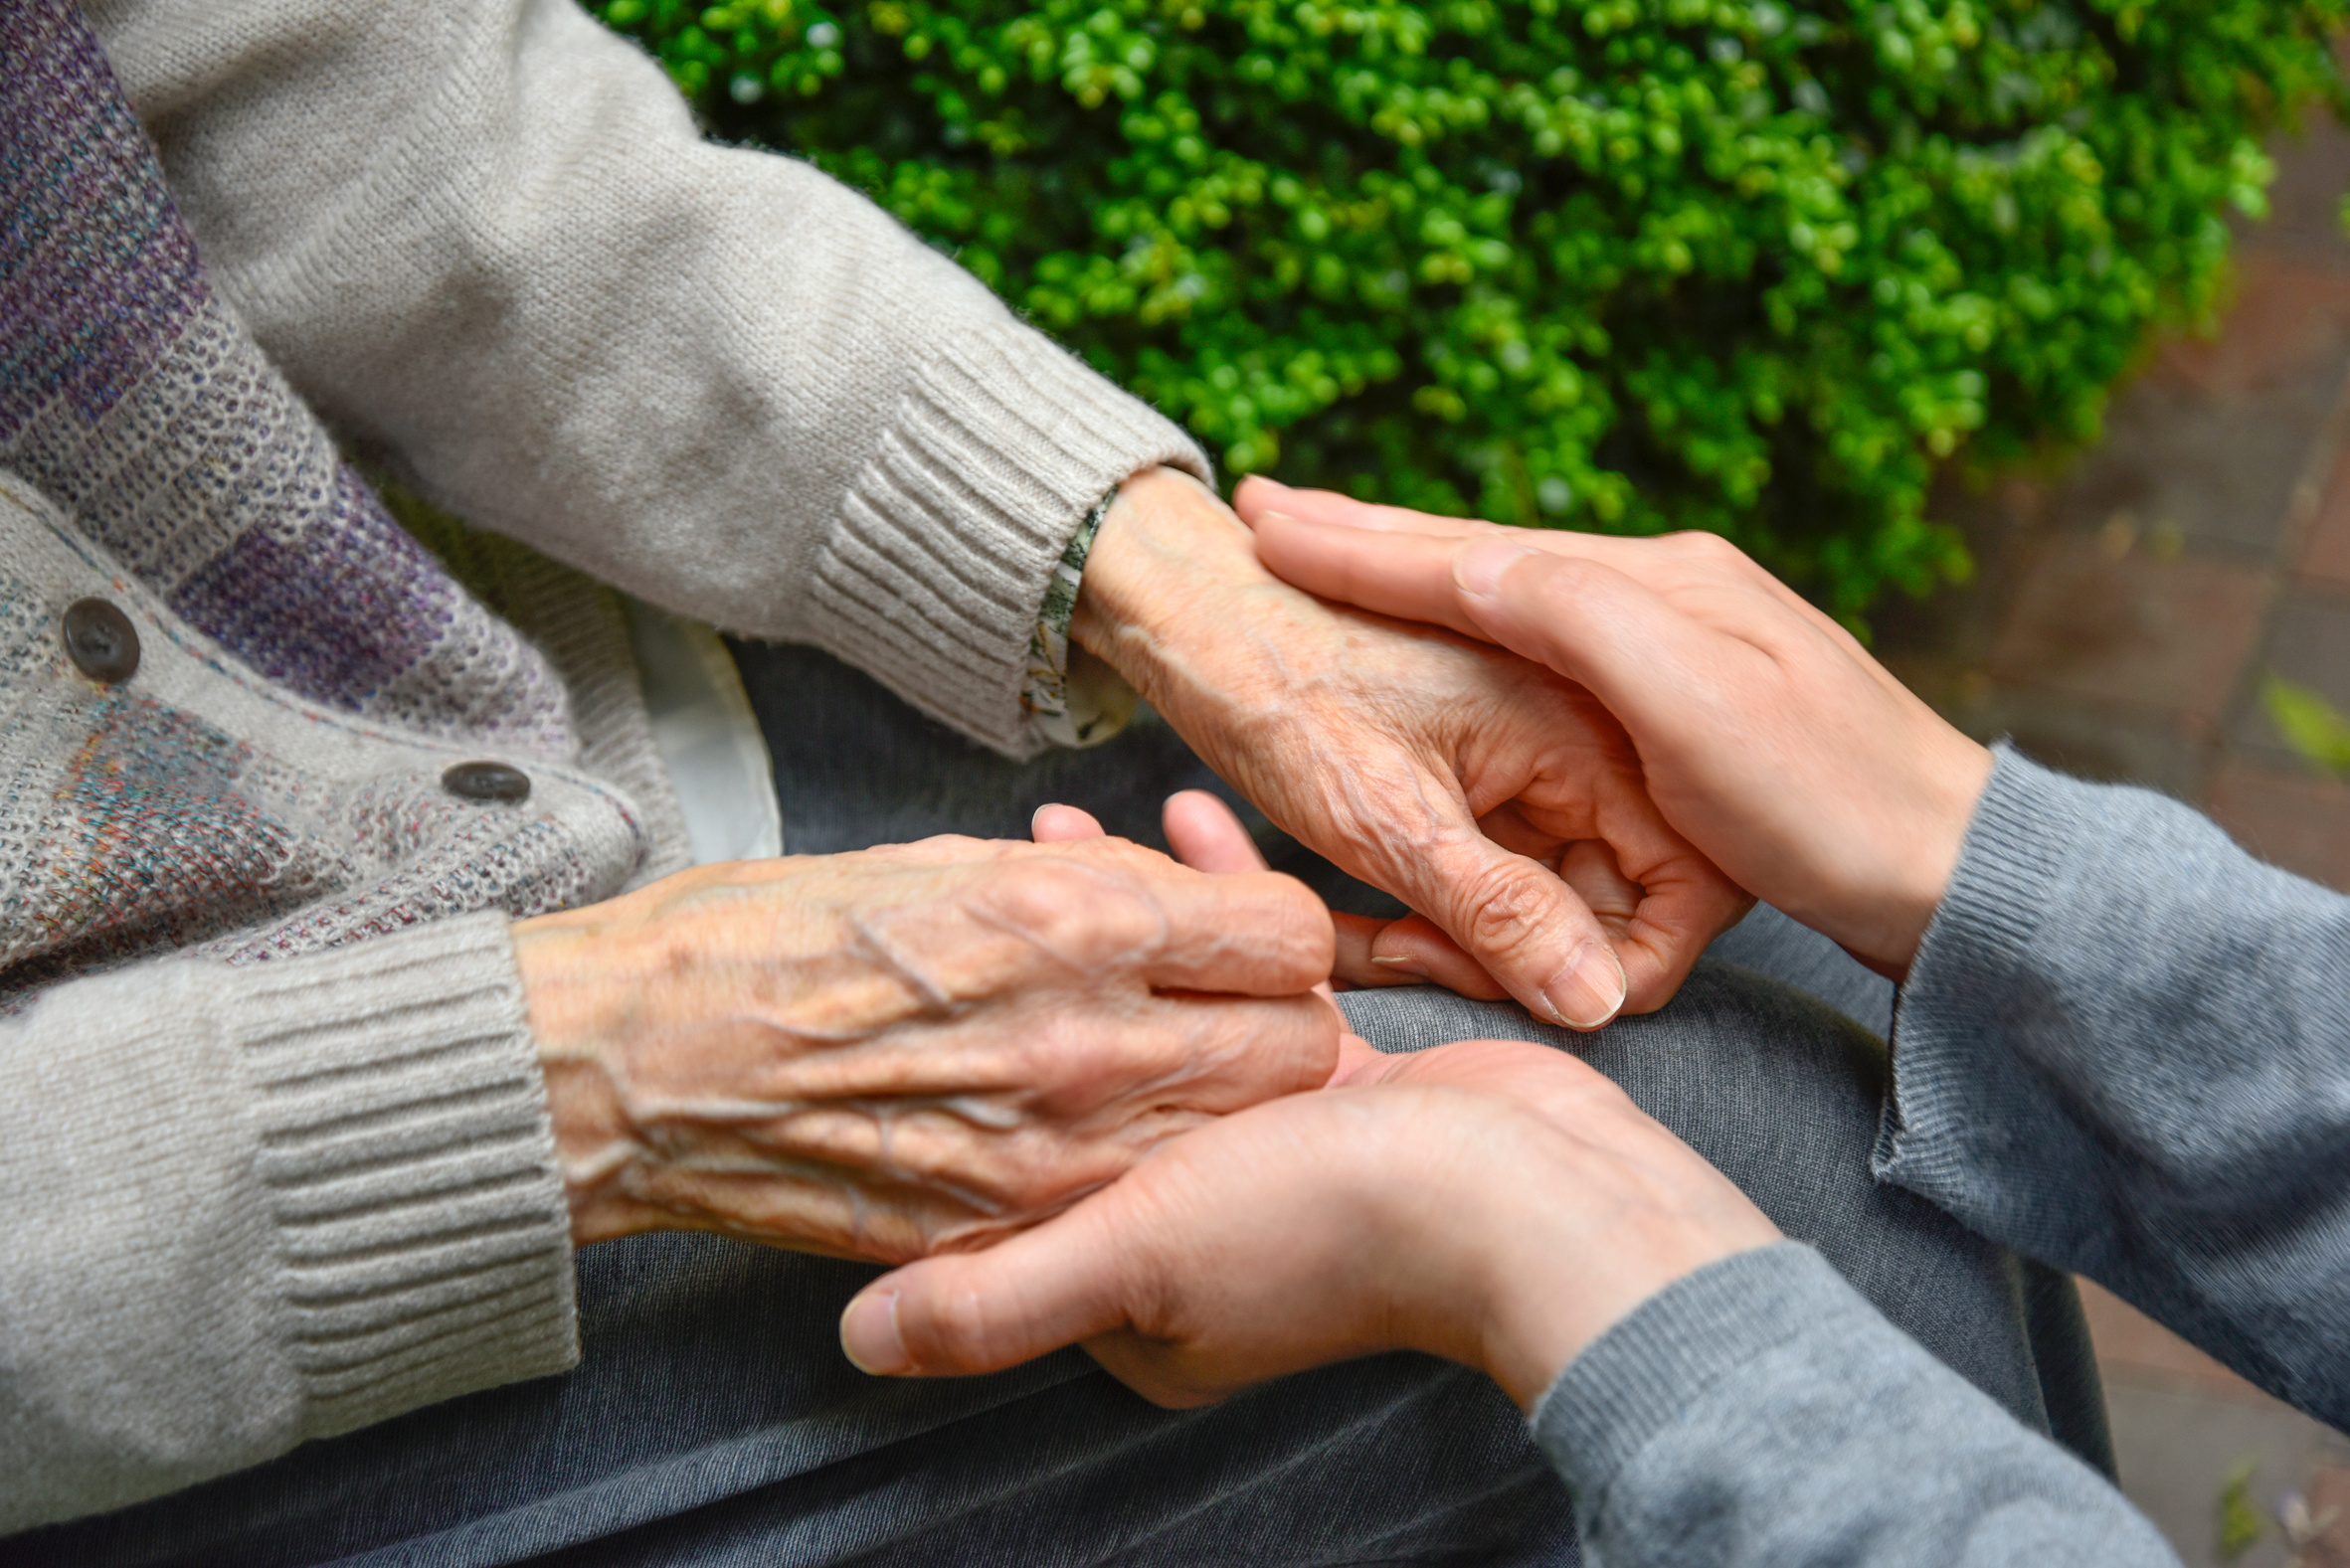 Touches the hands of an old woman - Concept of Elderly care